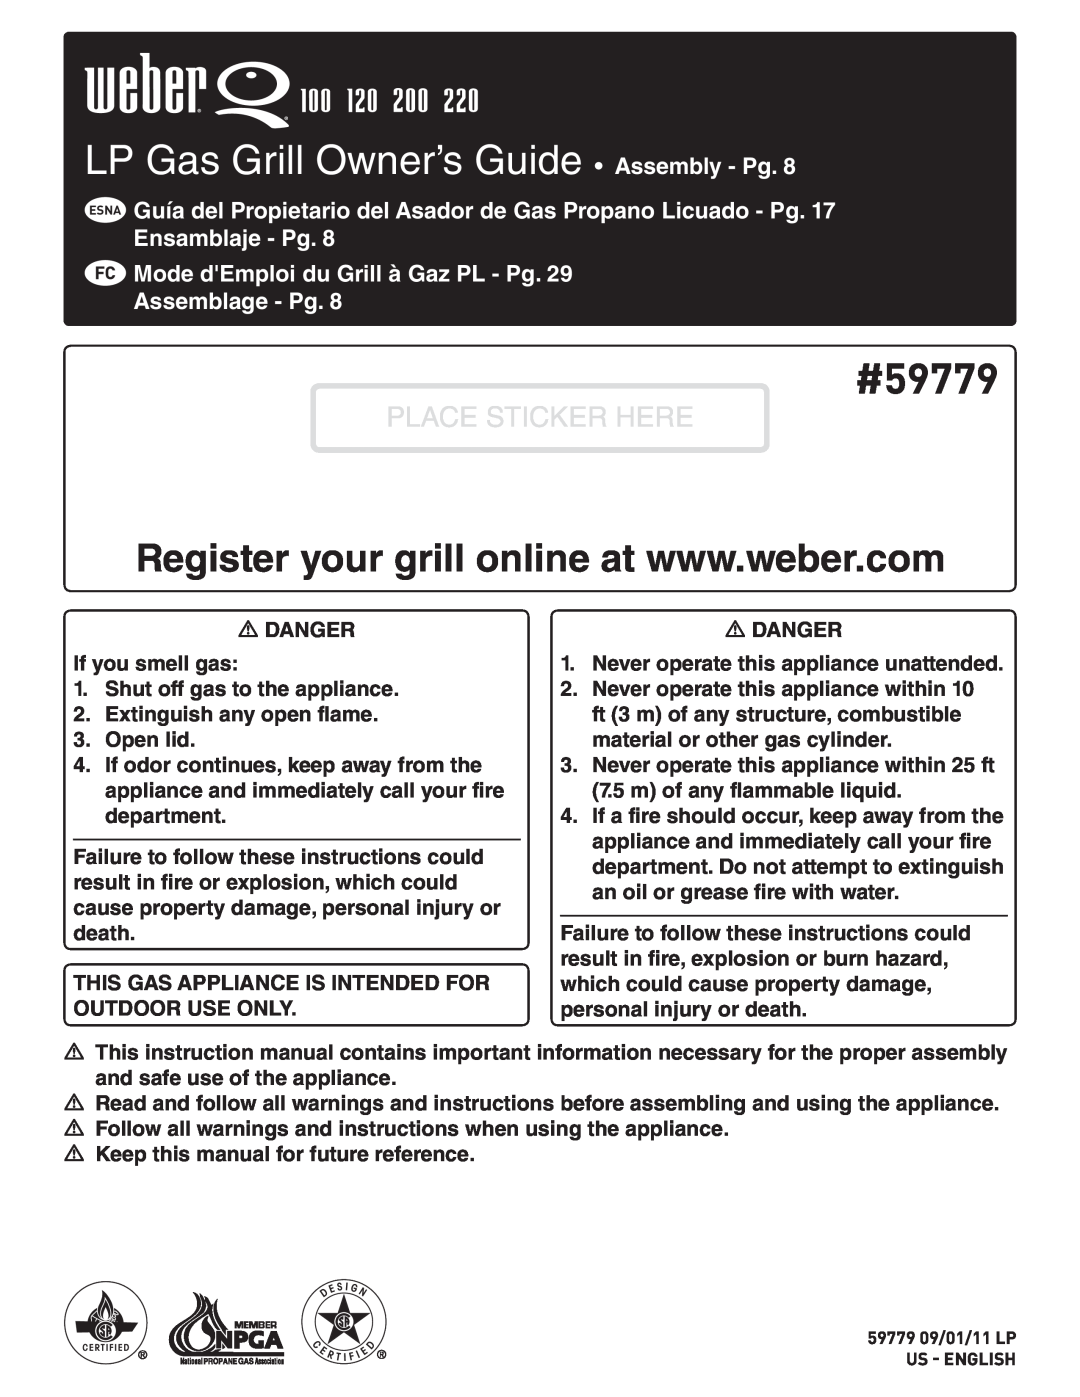 Weber 220, 100, 200, 120 owner manual Gas Grill Owner’s Guide, Place Sticker Here 